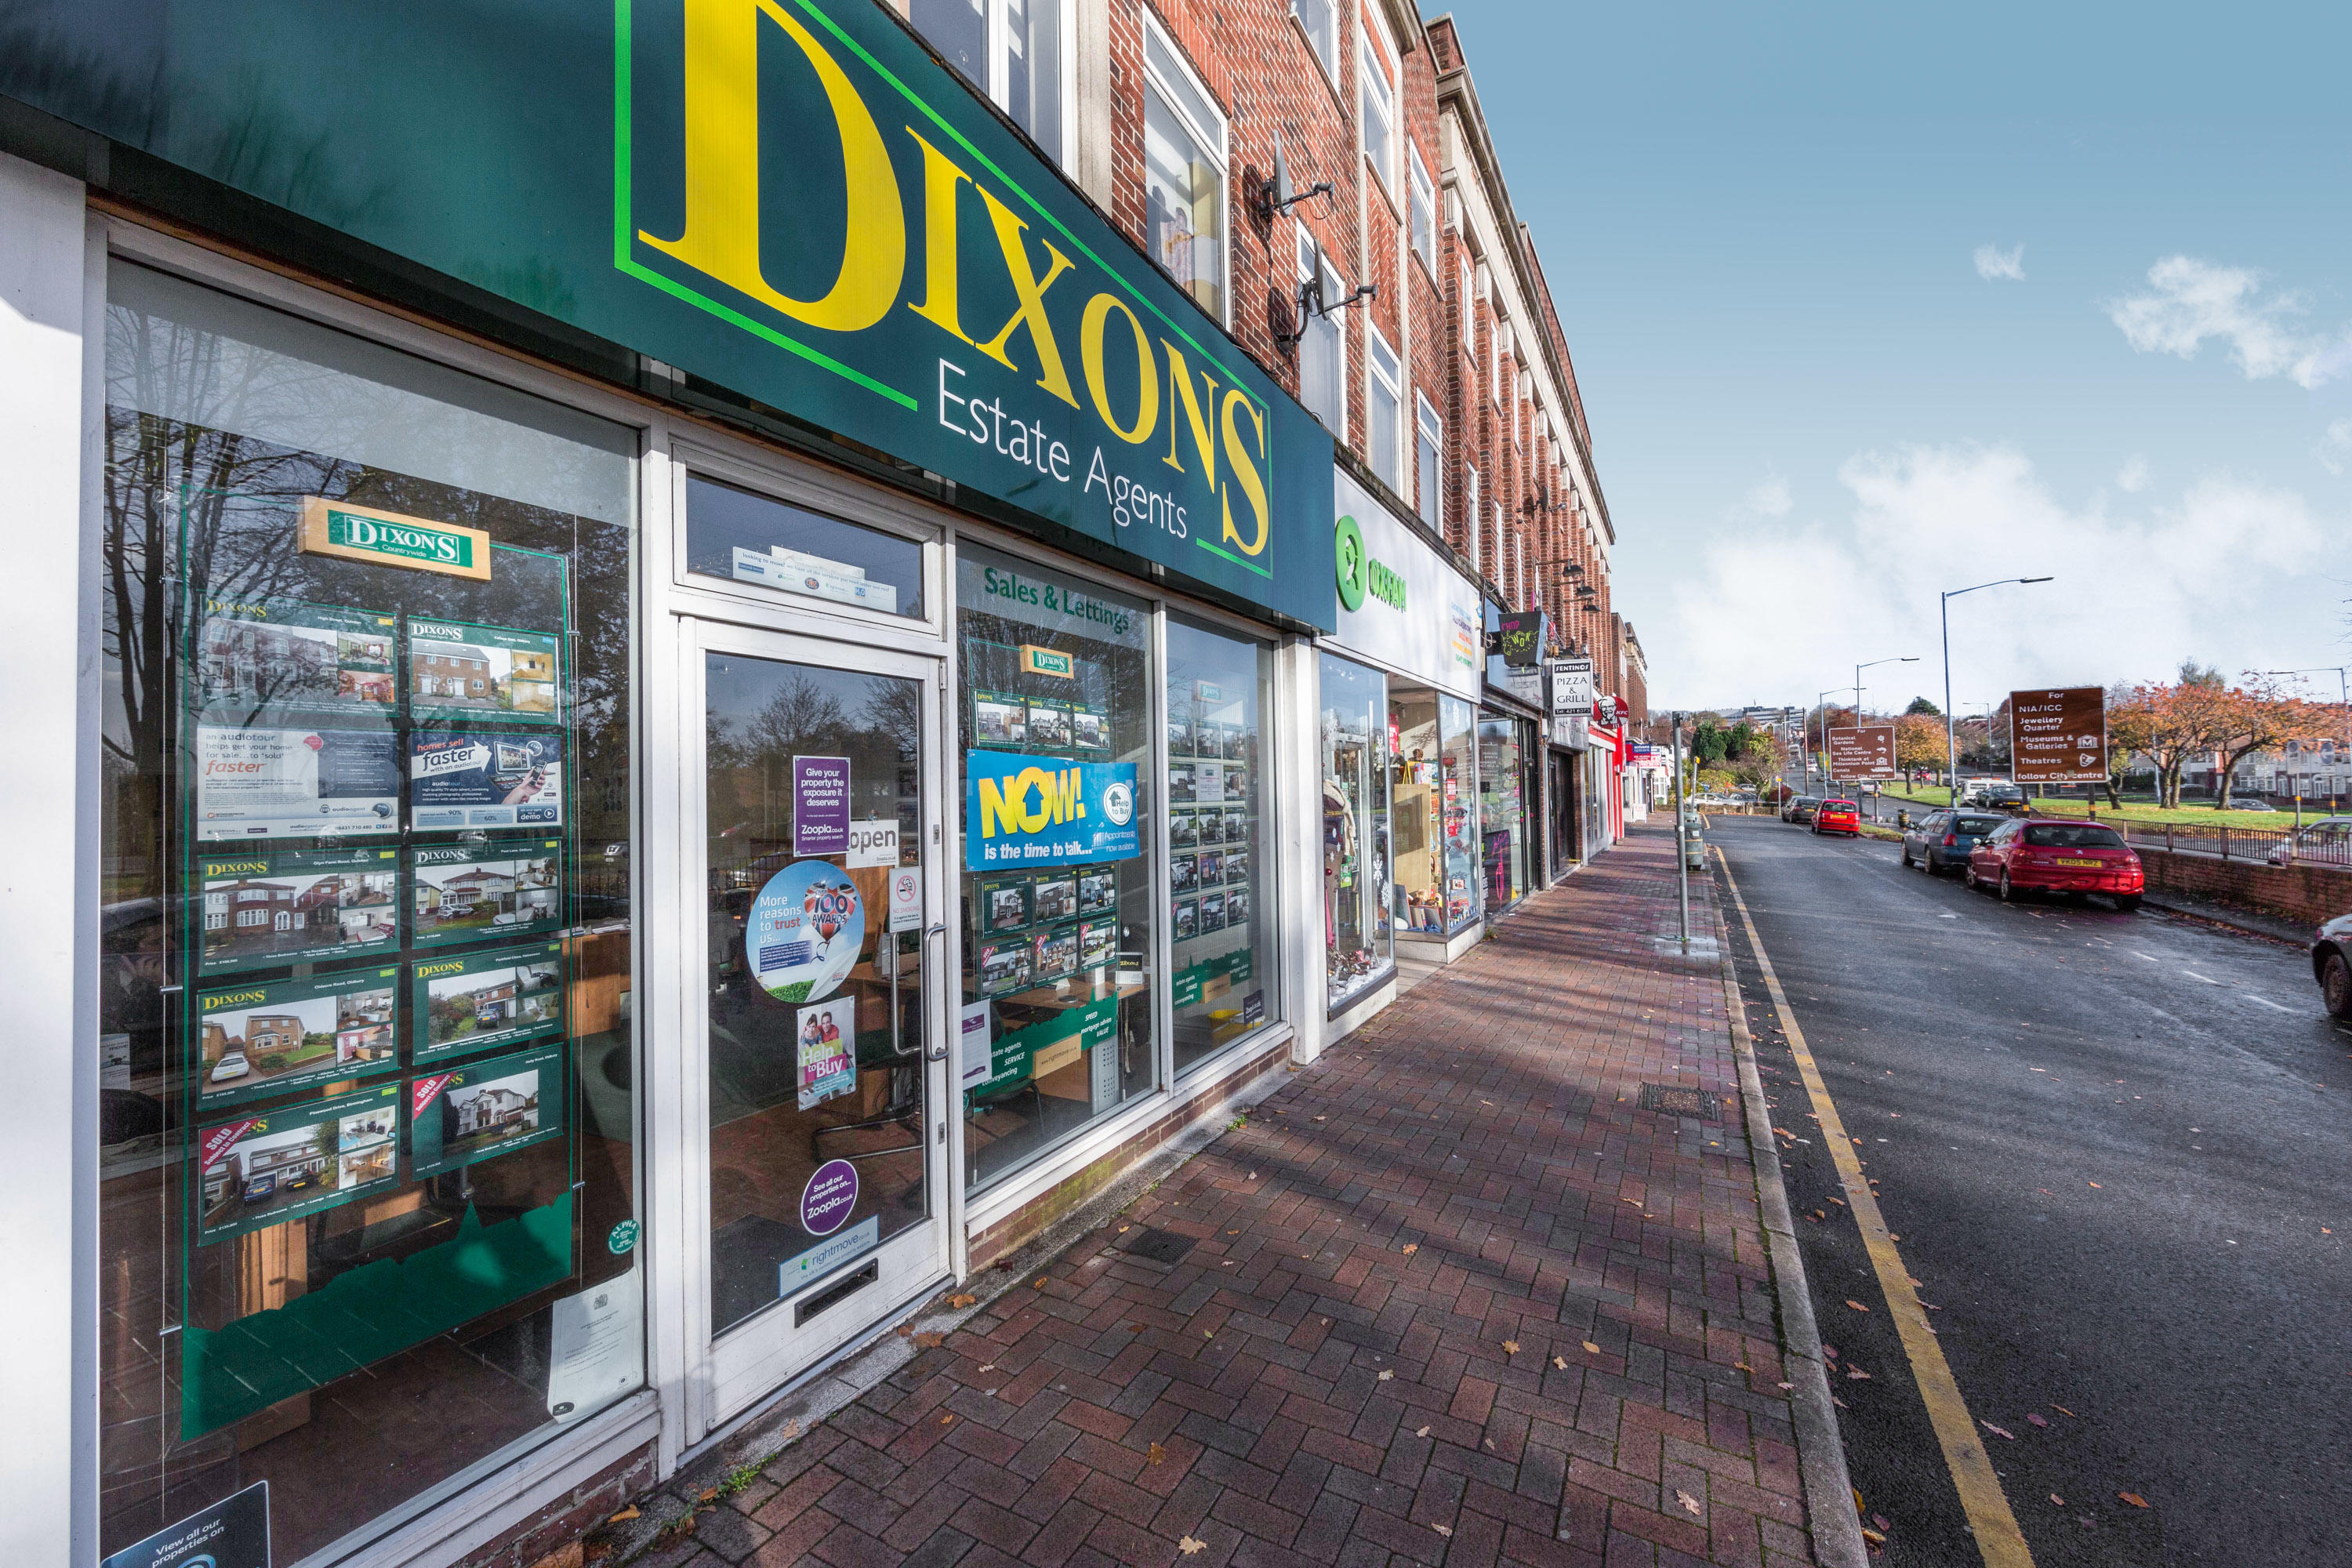 Images Dixons Sales and Letting Agents Quinton